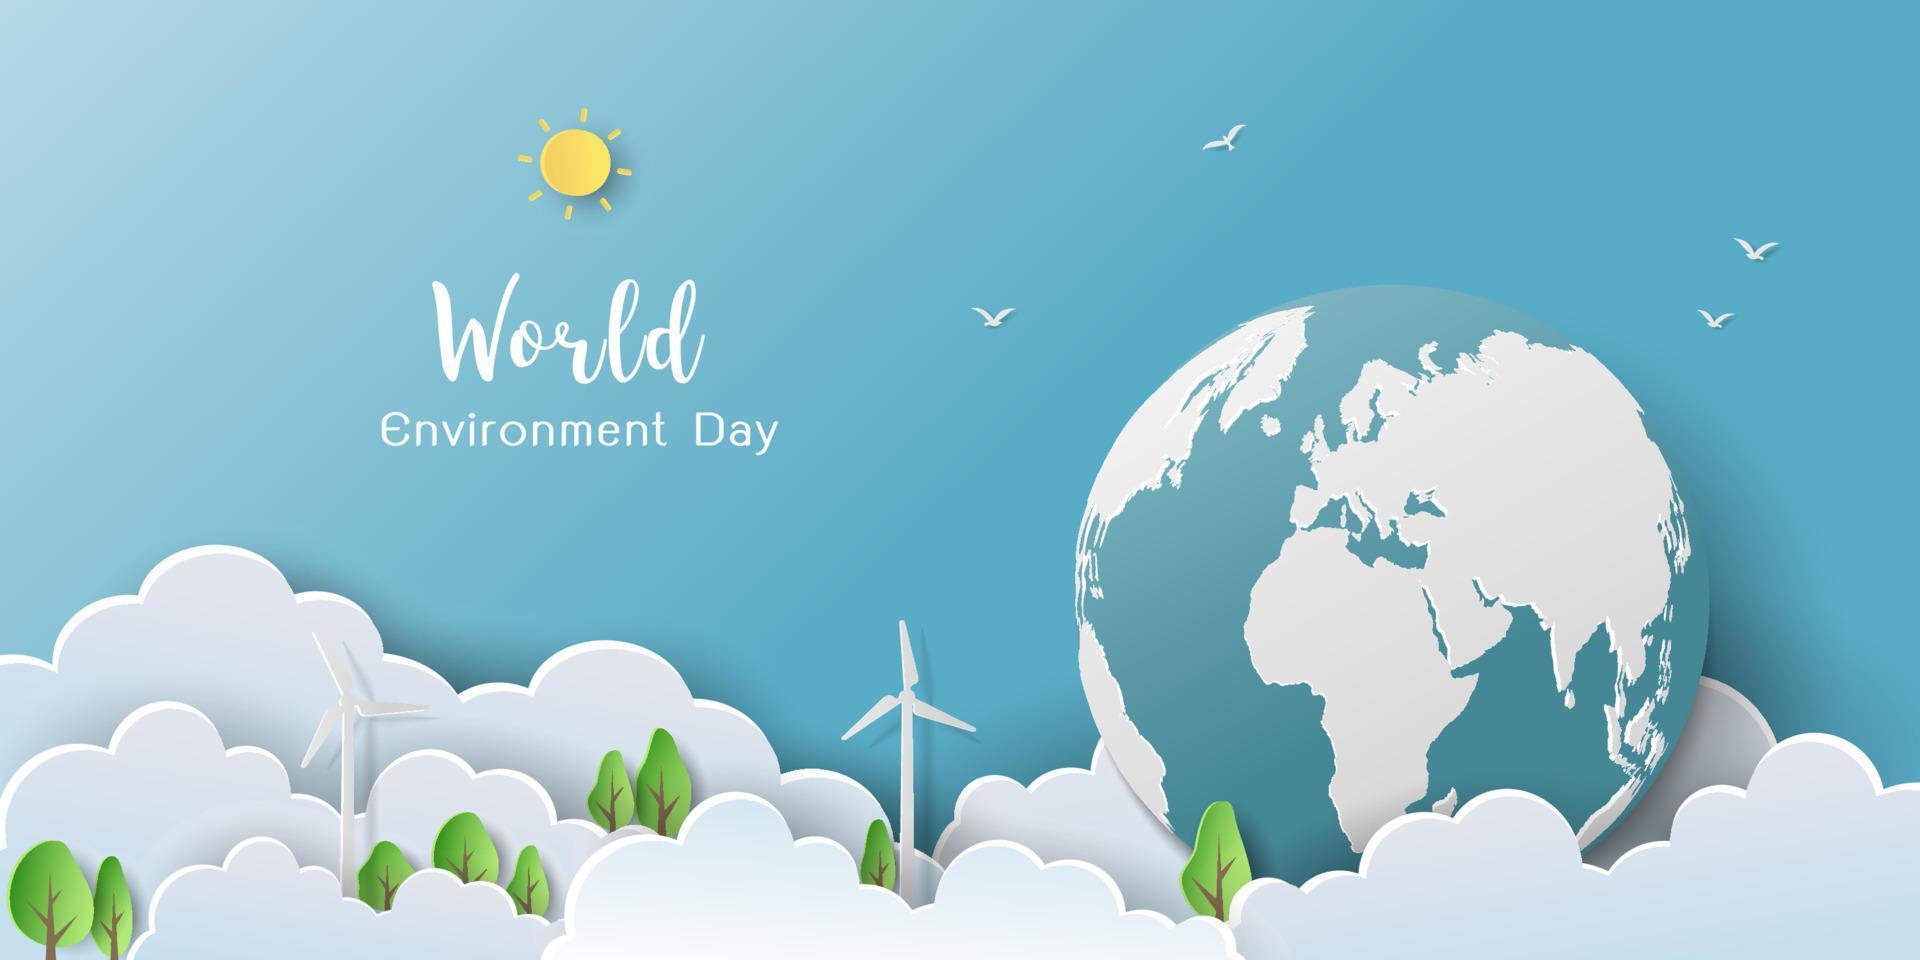 Save nature and eco friendly concept,background with green trees,cloud,windmill and globe on paper cut style vector